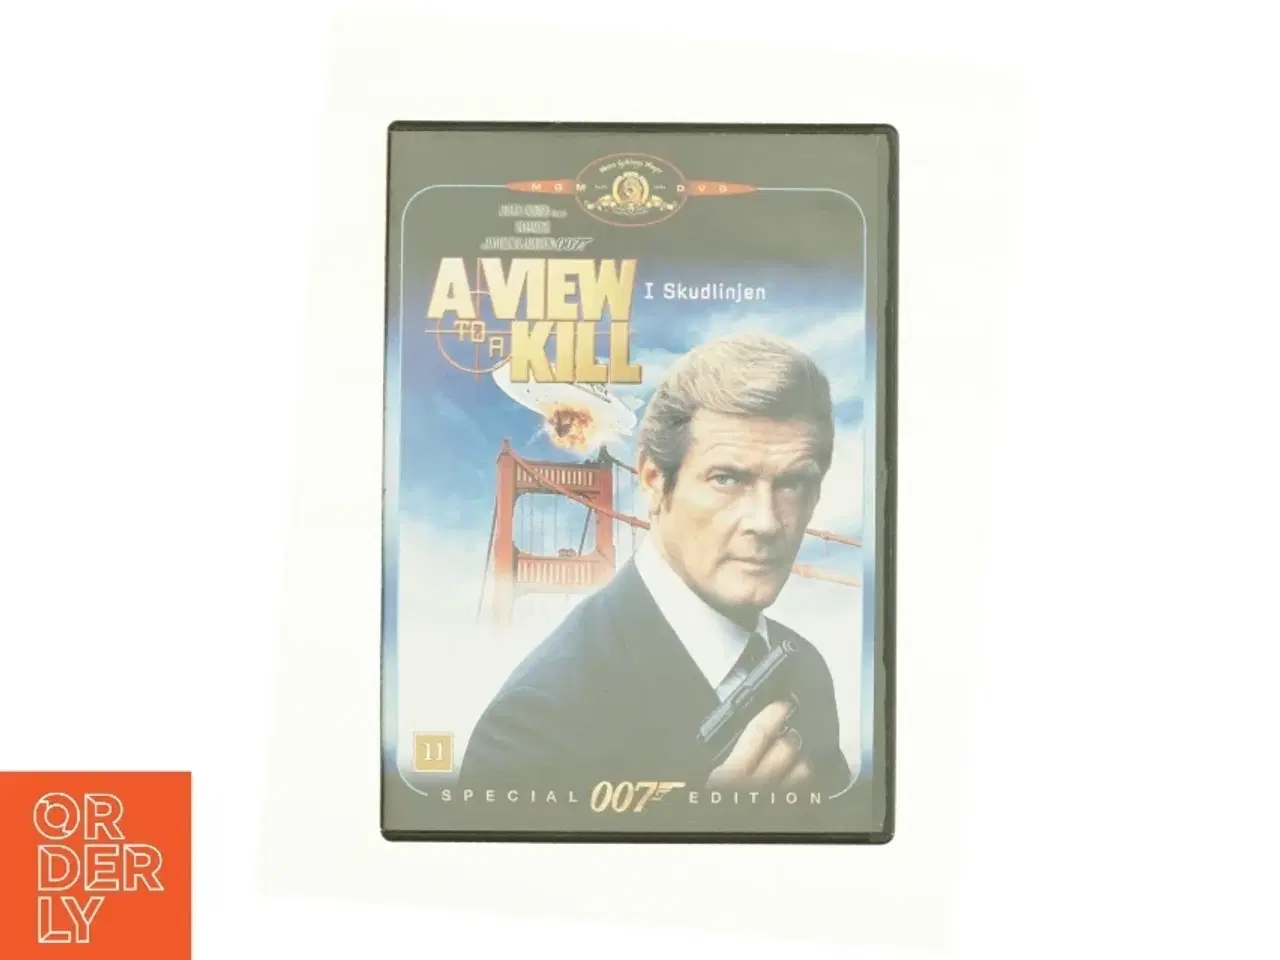 Billede 1 - Agent 007 - a View to a Kill fra DVD